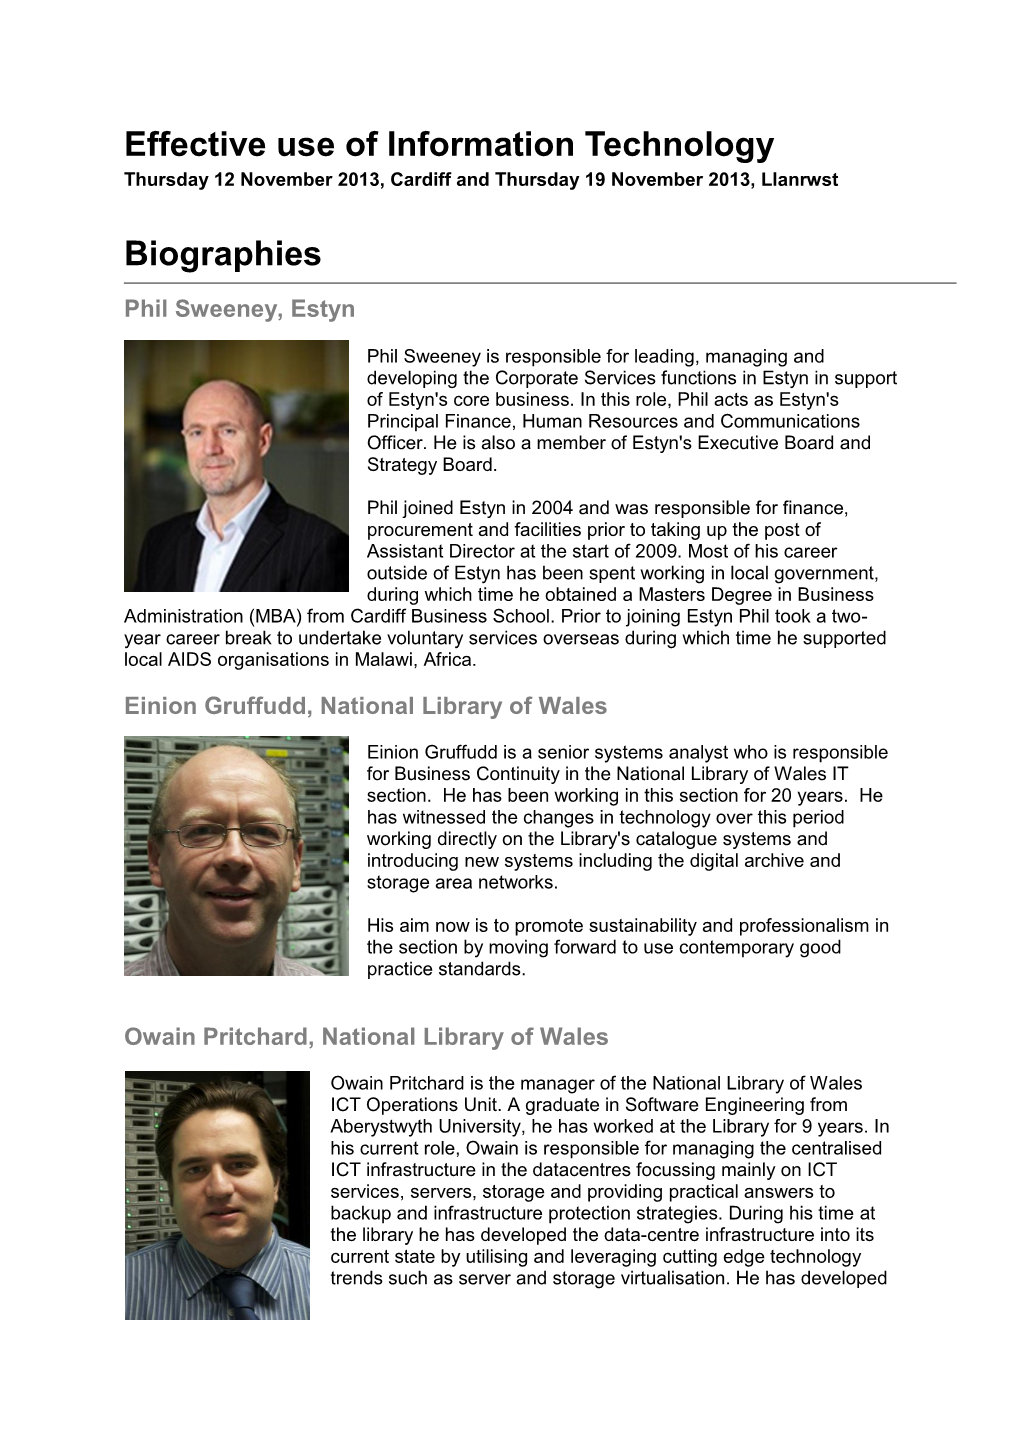 Effective Use of Information Technology Biographies